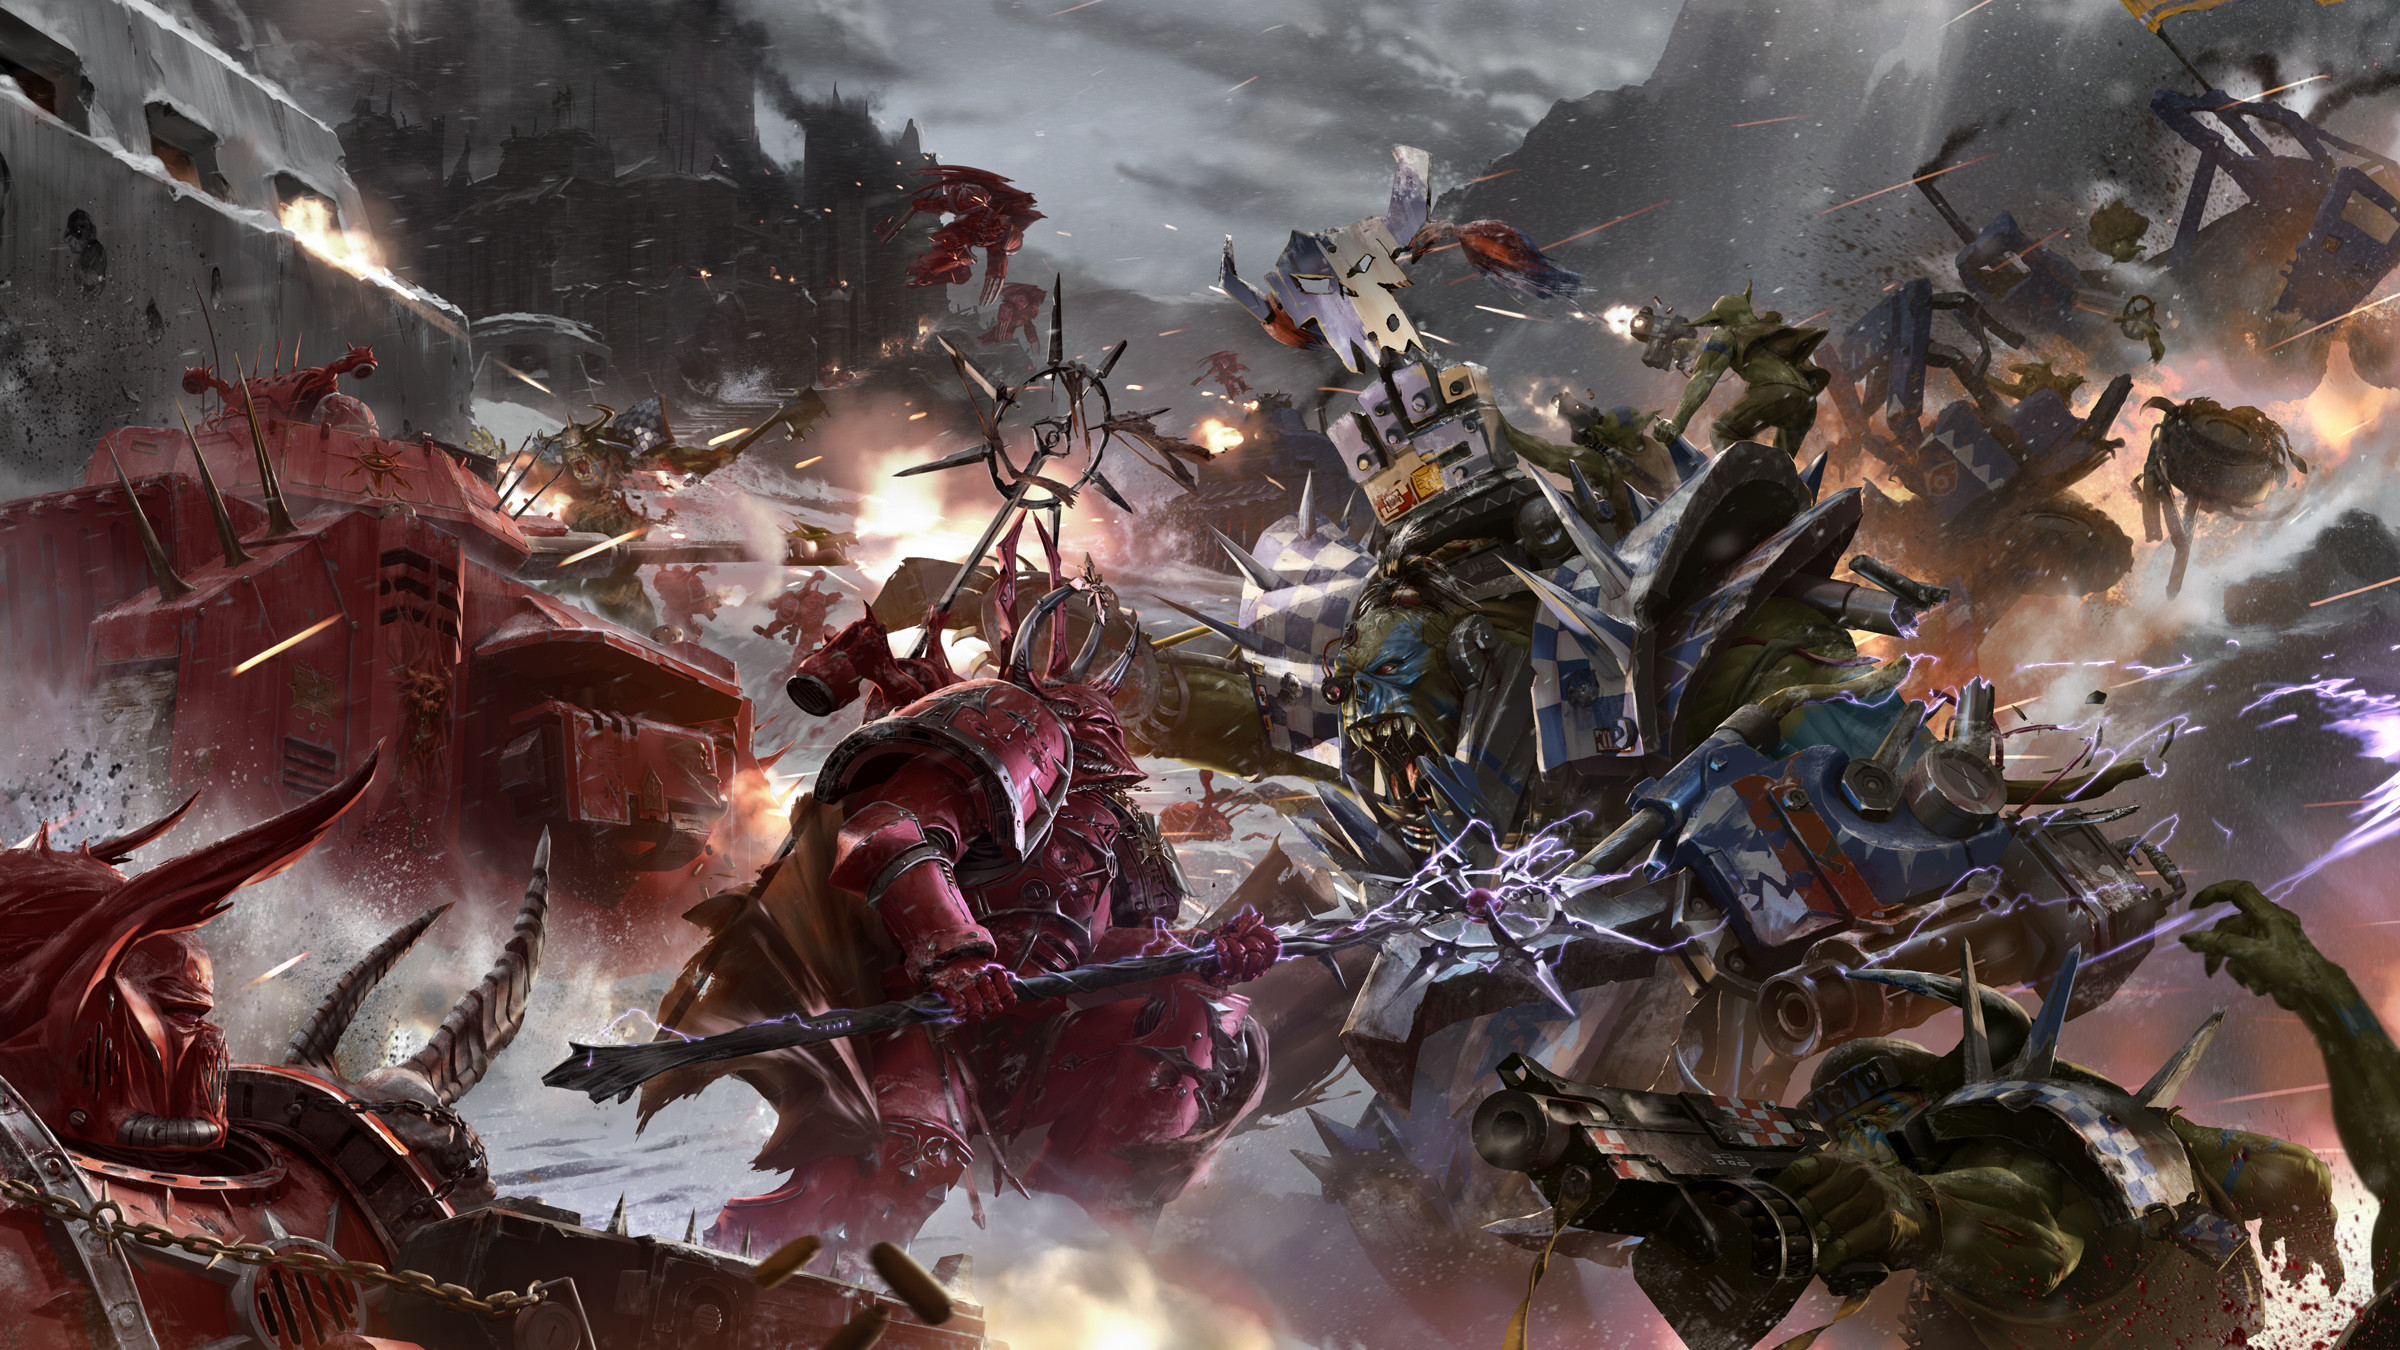 2400x1350 The Battle of Armageddon Full HD Wallpaper and Background .